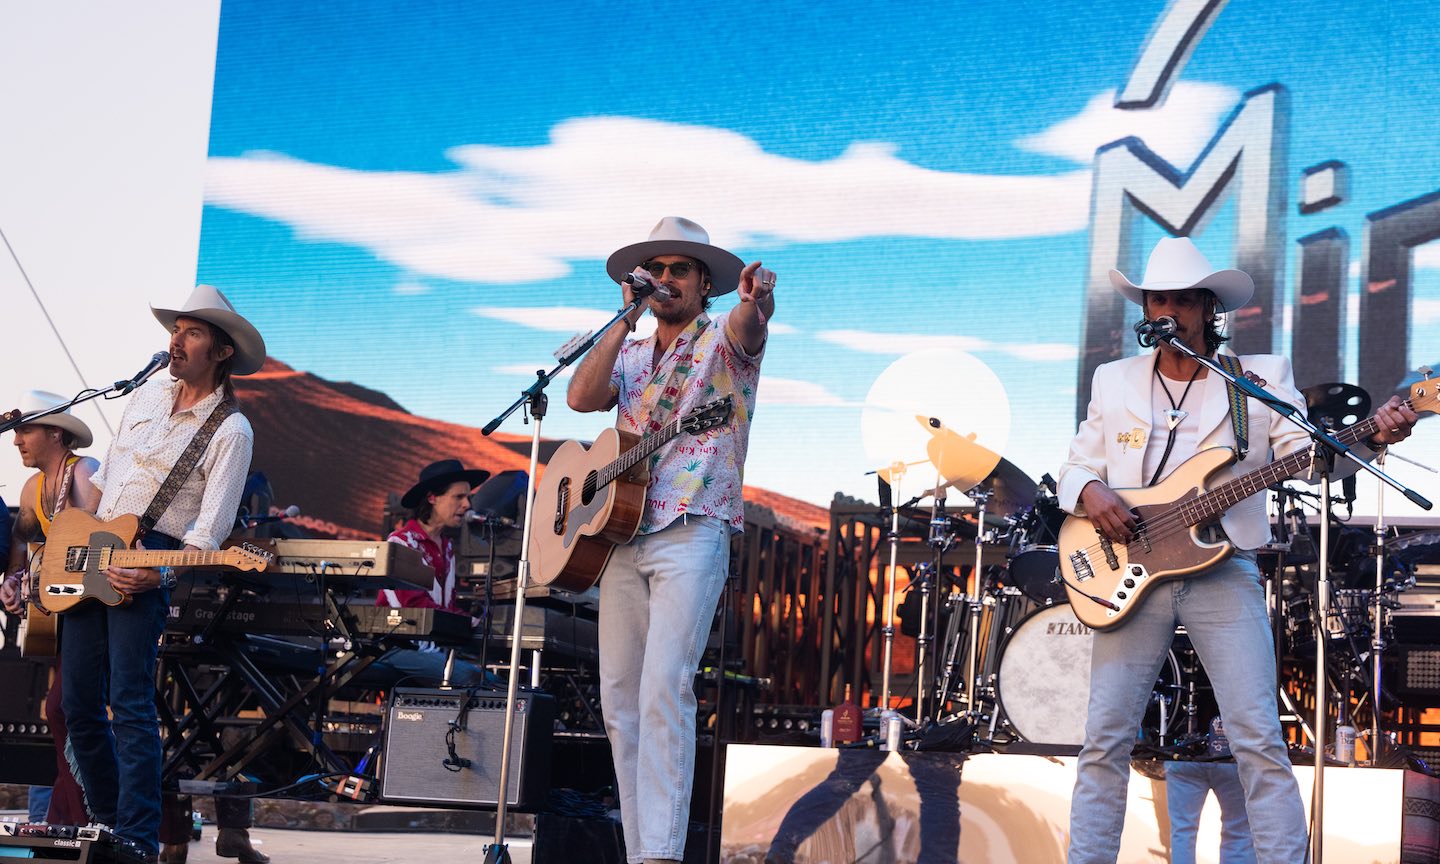 Midland Confirmed For Wild Horses Festival, With LeAnn Rimes And More